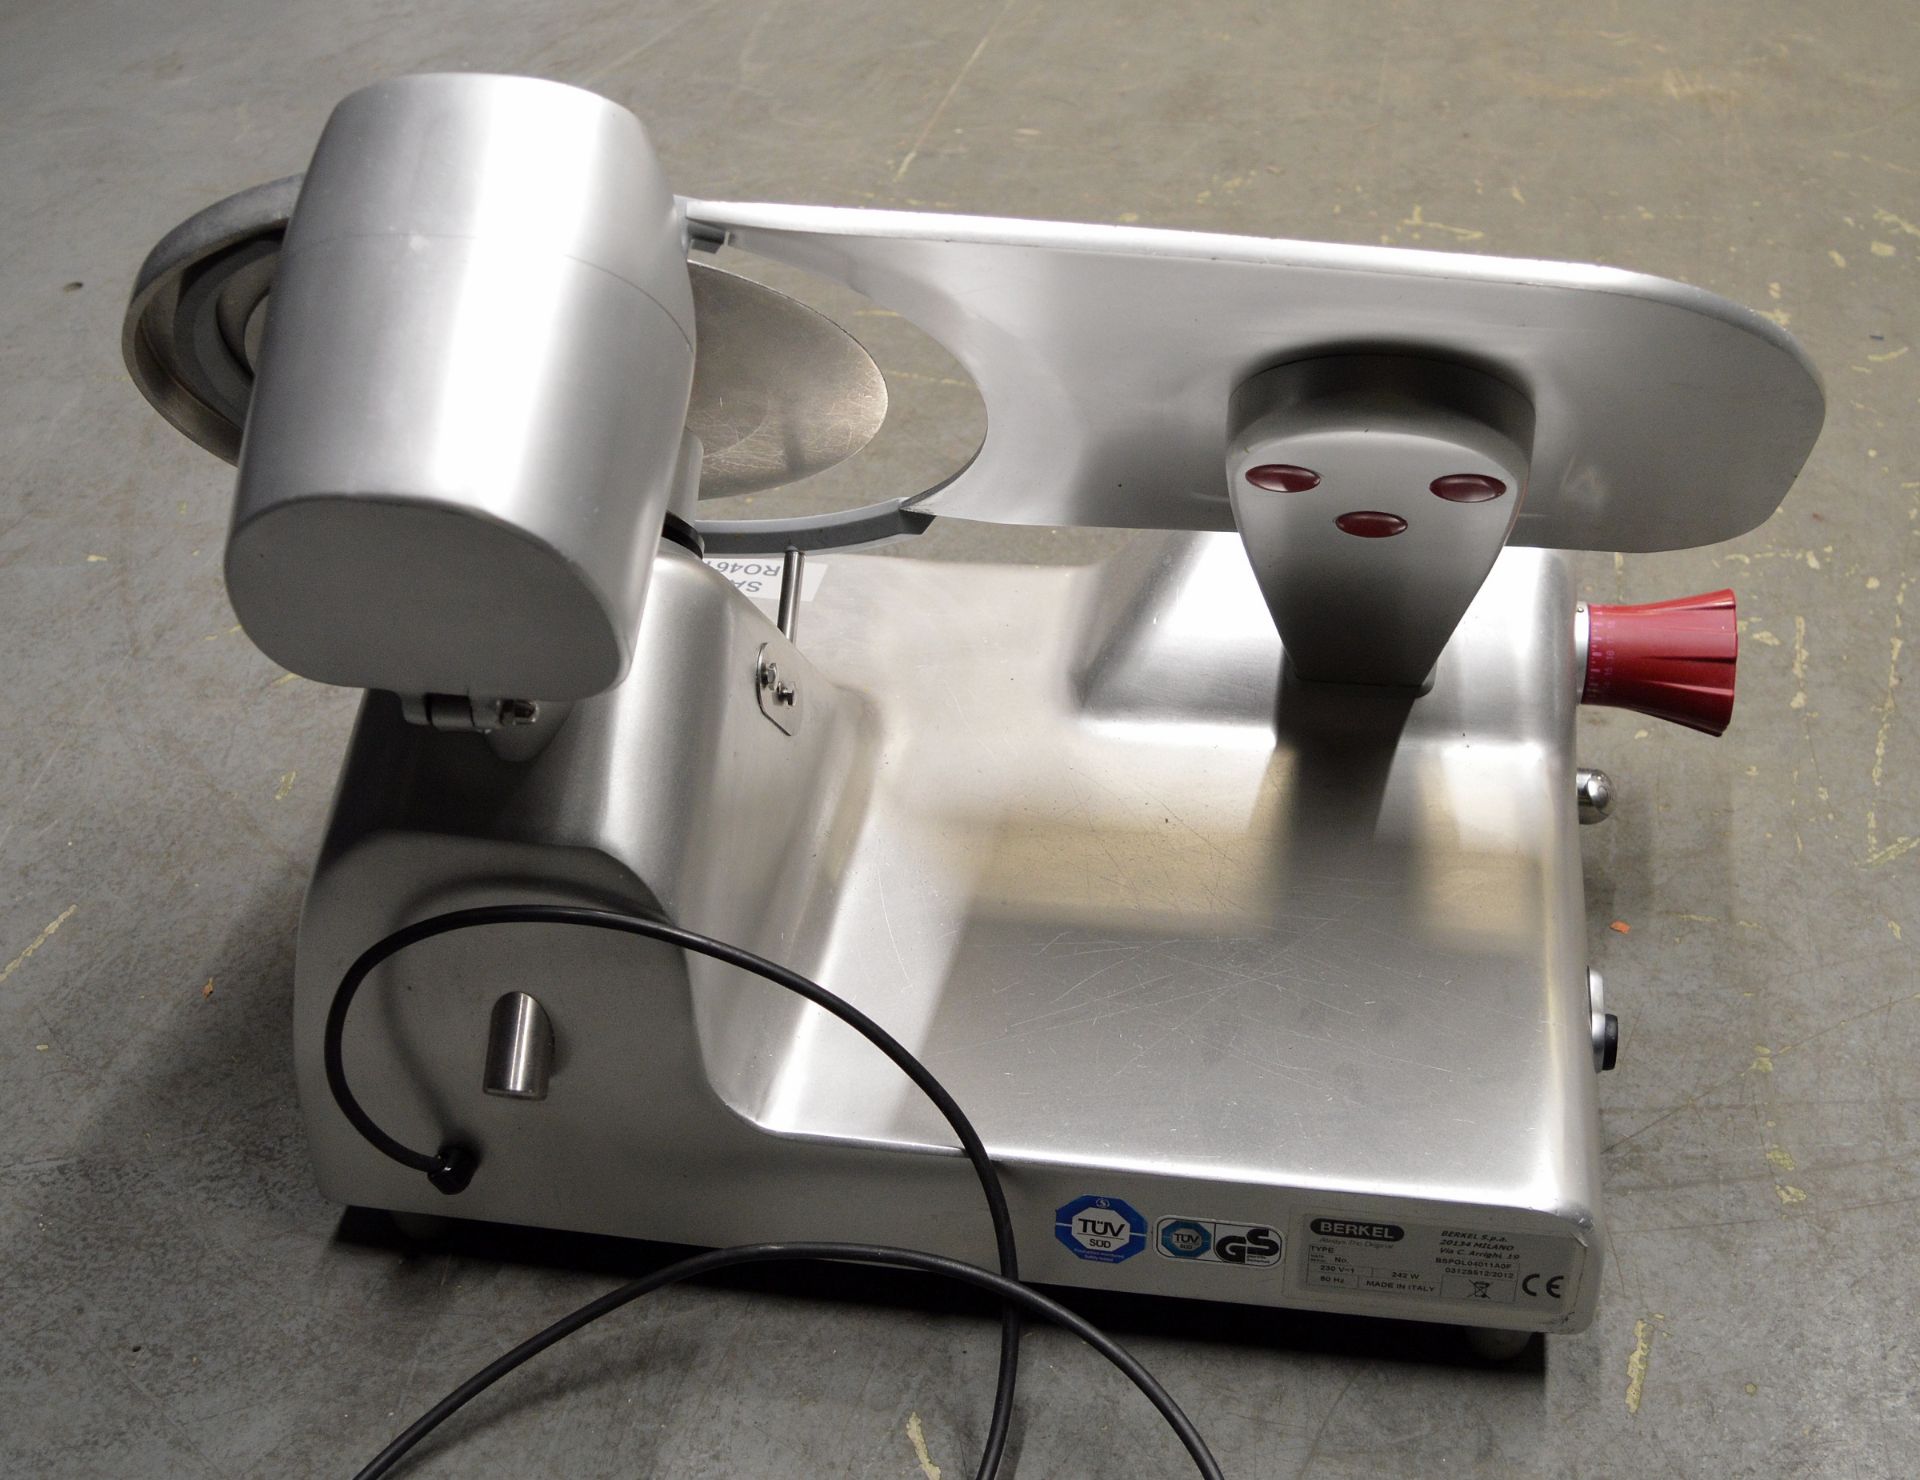 Berkel BSPGL04011A0F 12" Commercial Cooked Meat / Bacon Slicer, single phase electric - Image 4 of 5